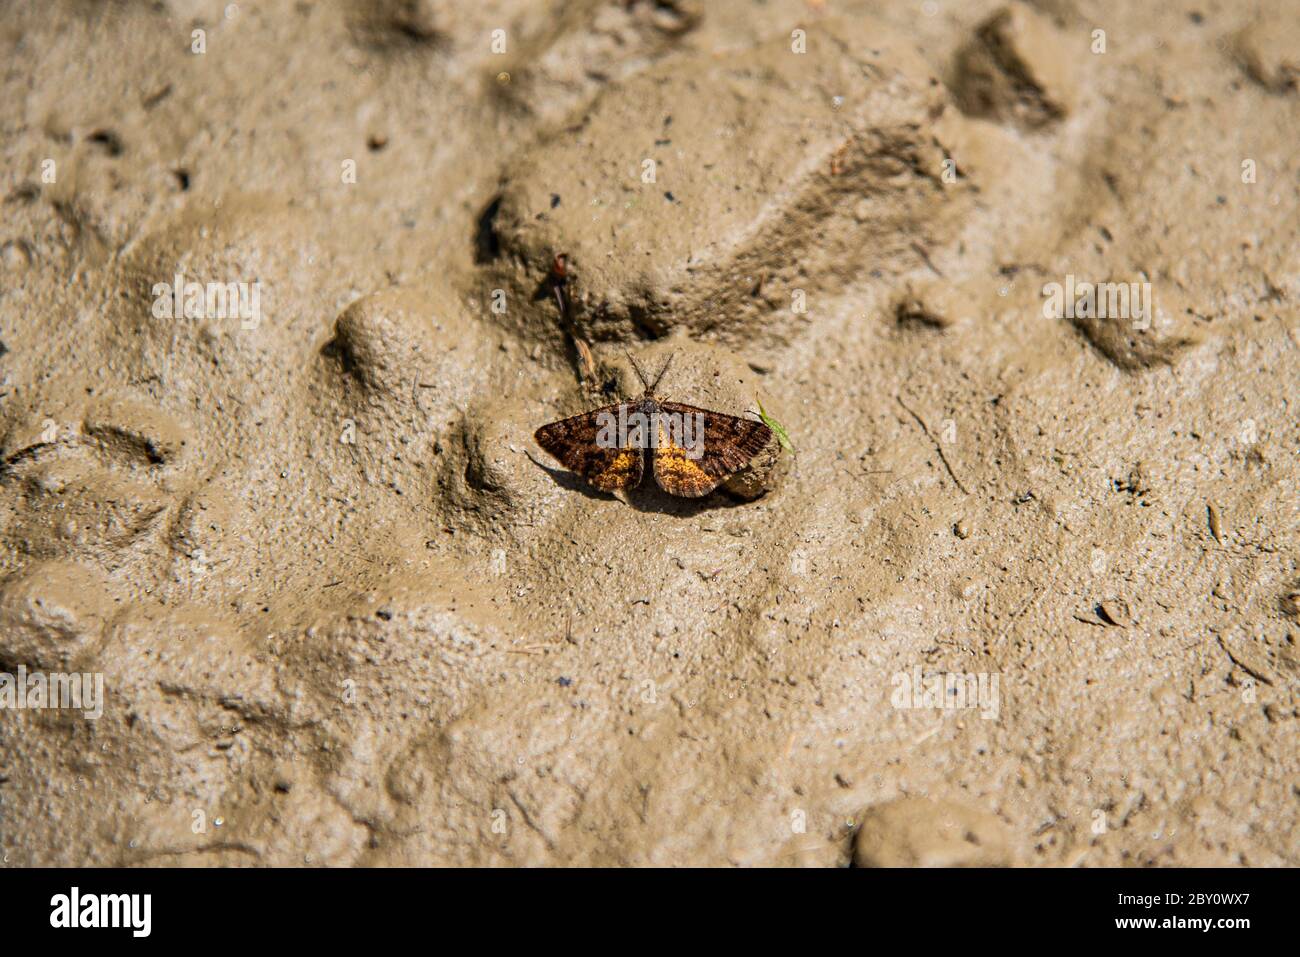 Cranberry Spanworm Moth rests on a lump of mud. Stock Photo